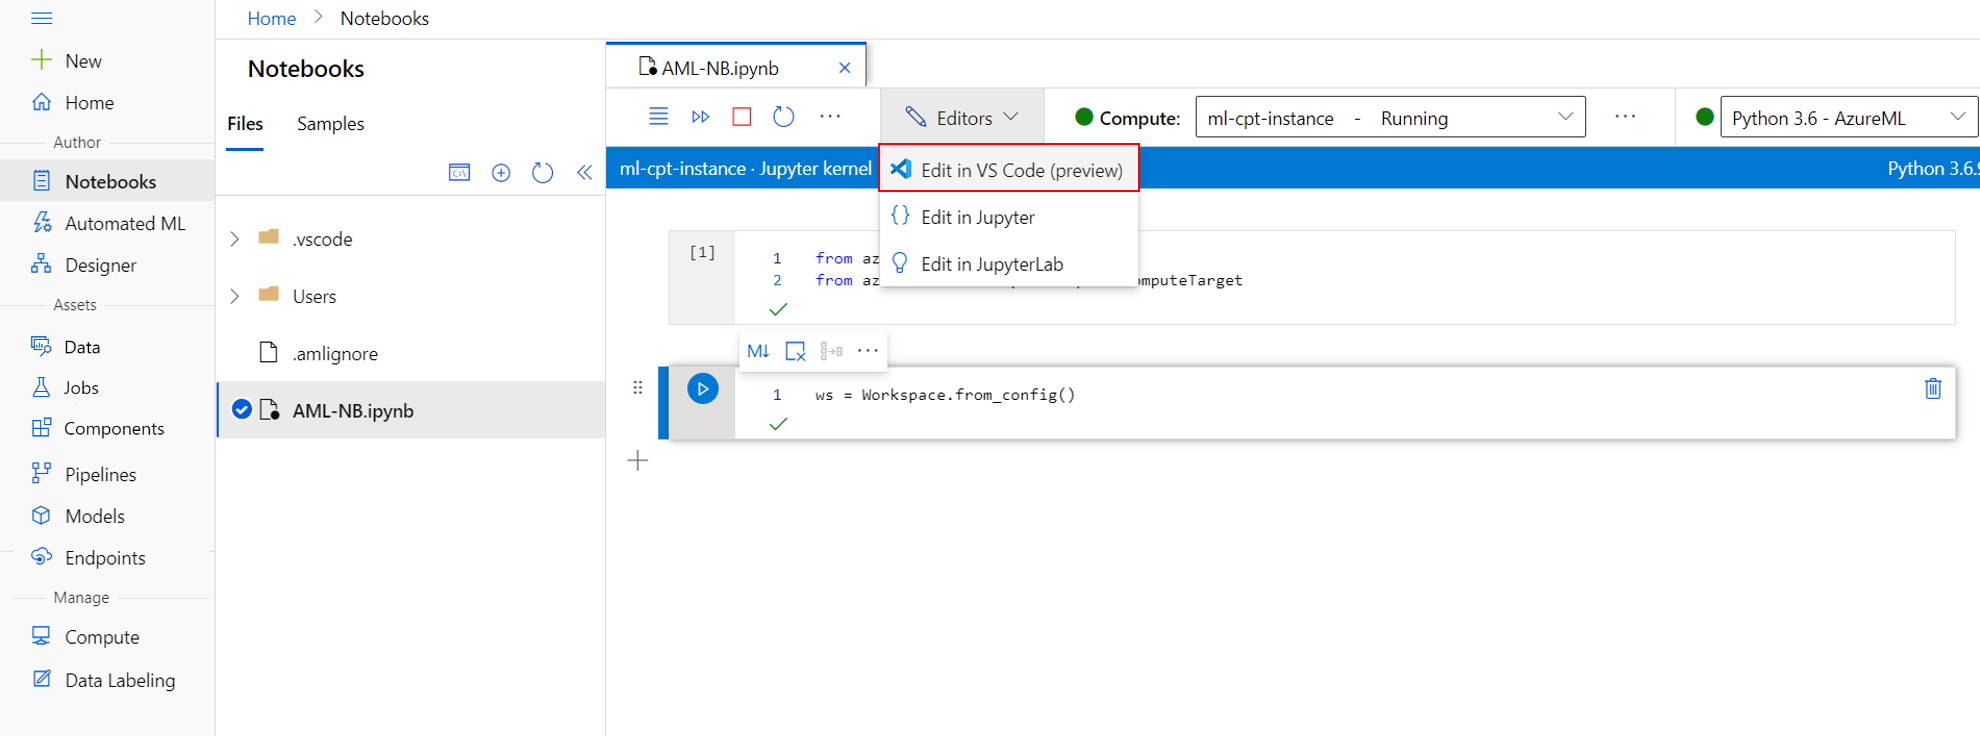 Connect to Compute Instance VS Code Azure ML Notebook